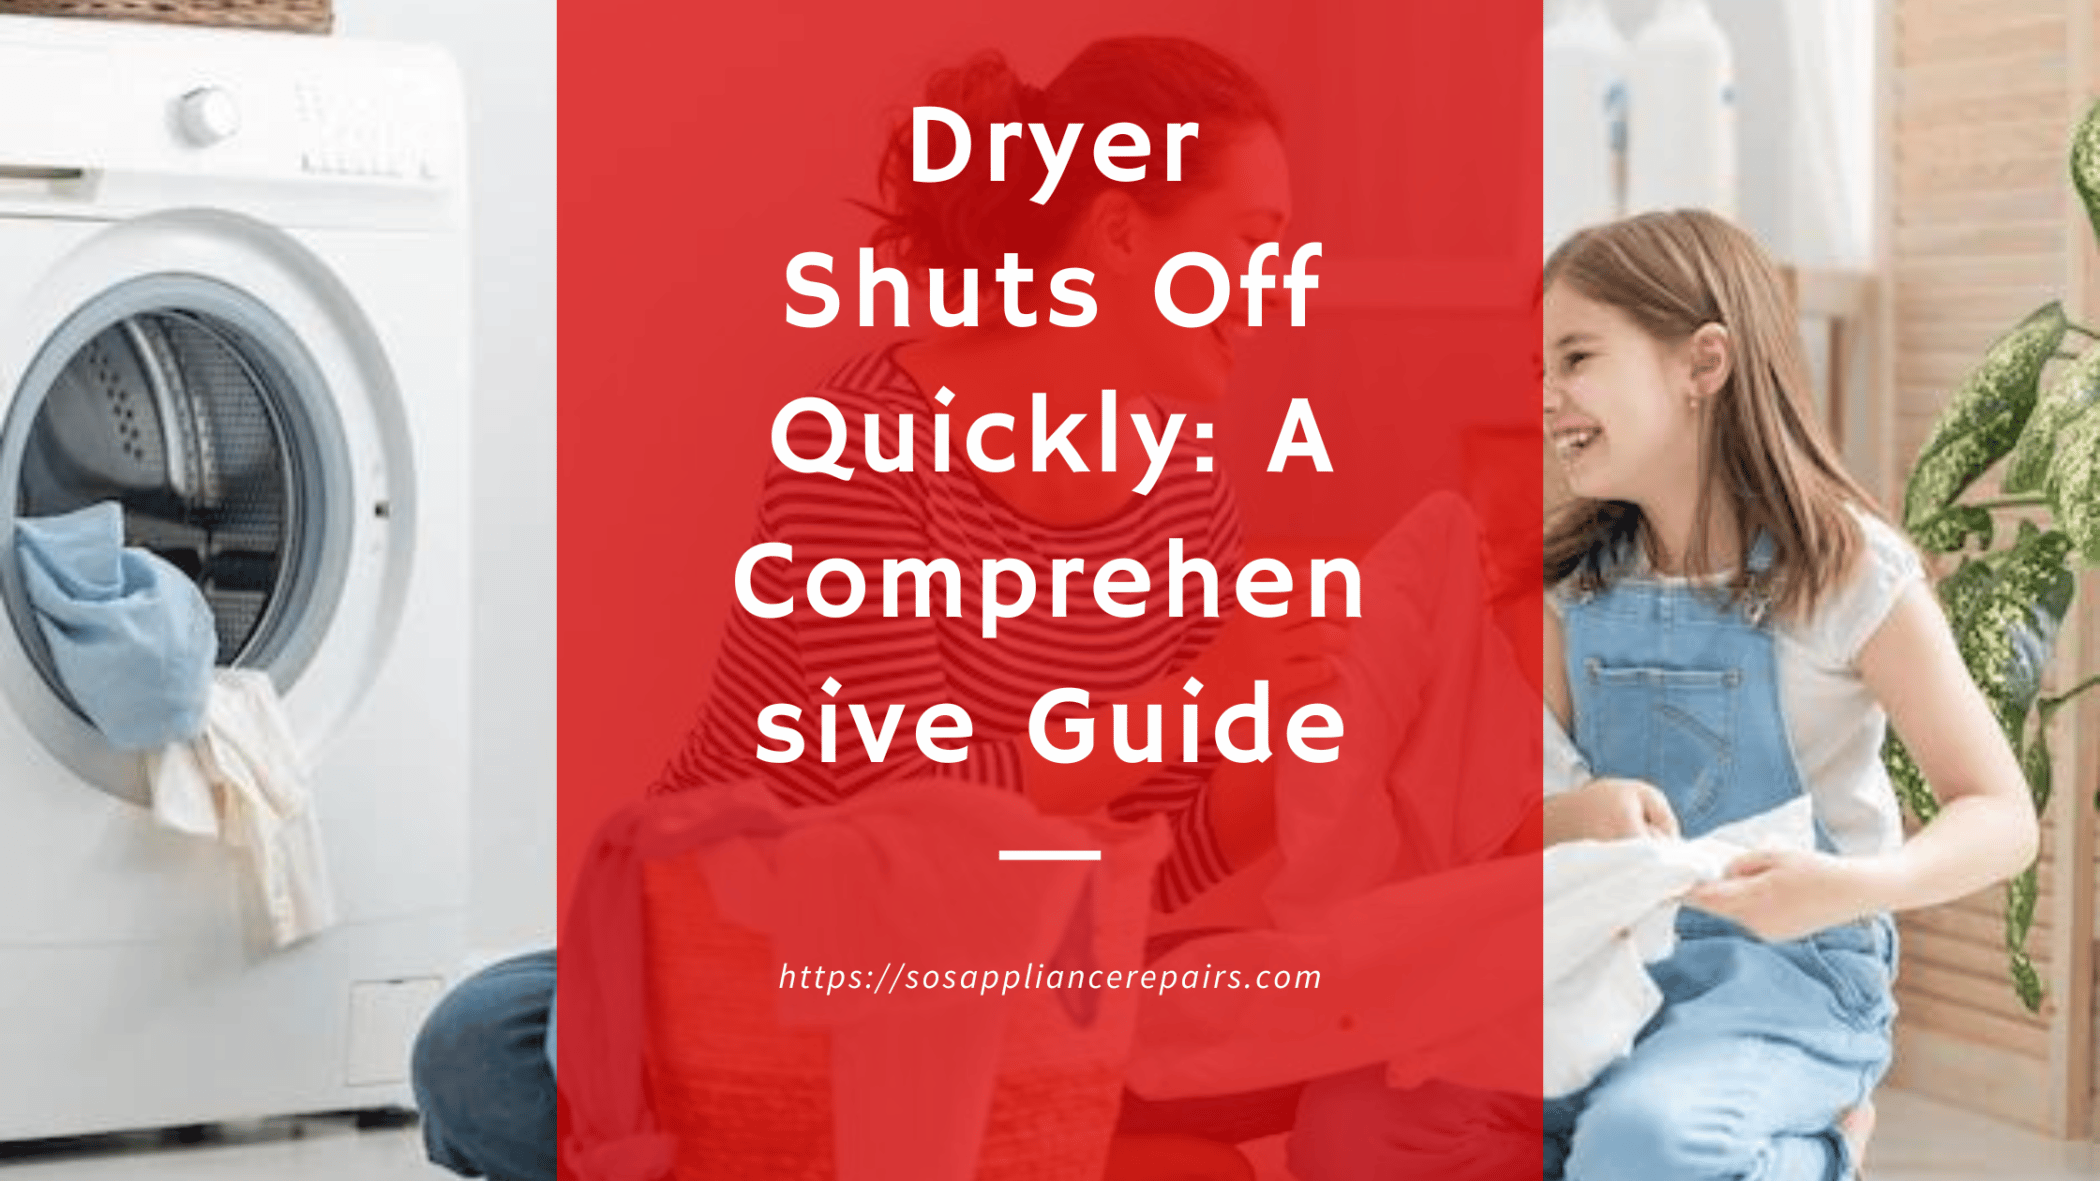 dryer shuts off quickly - sos appliance repairs